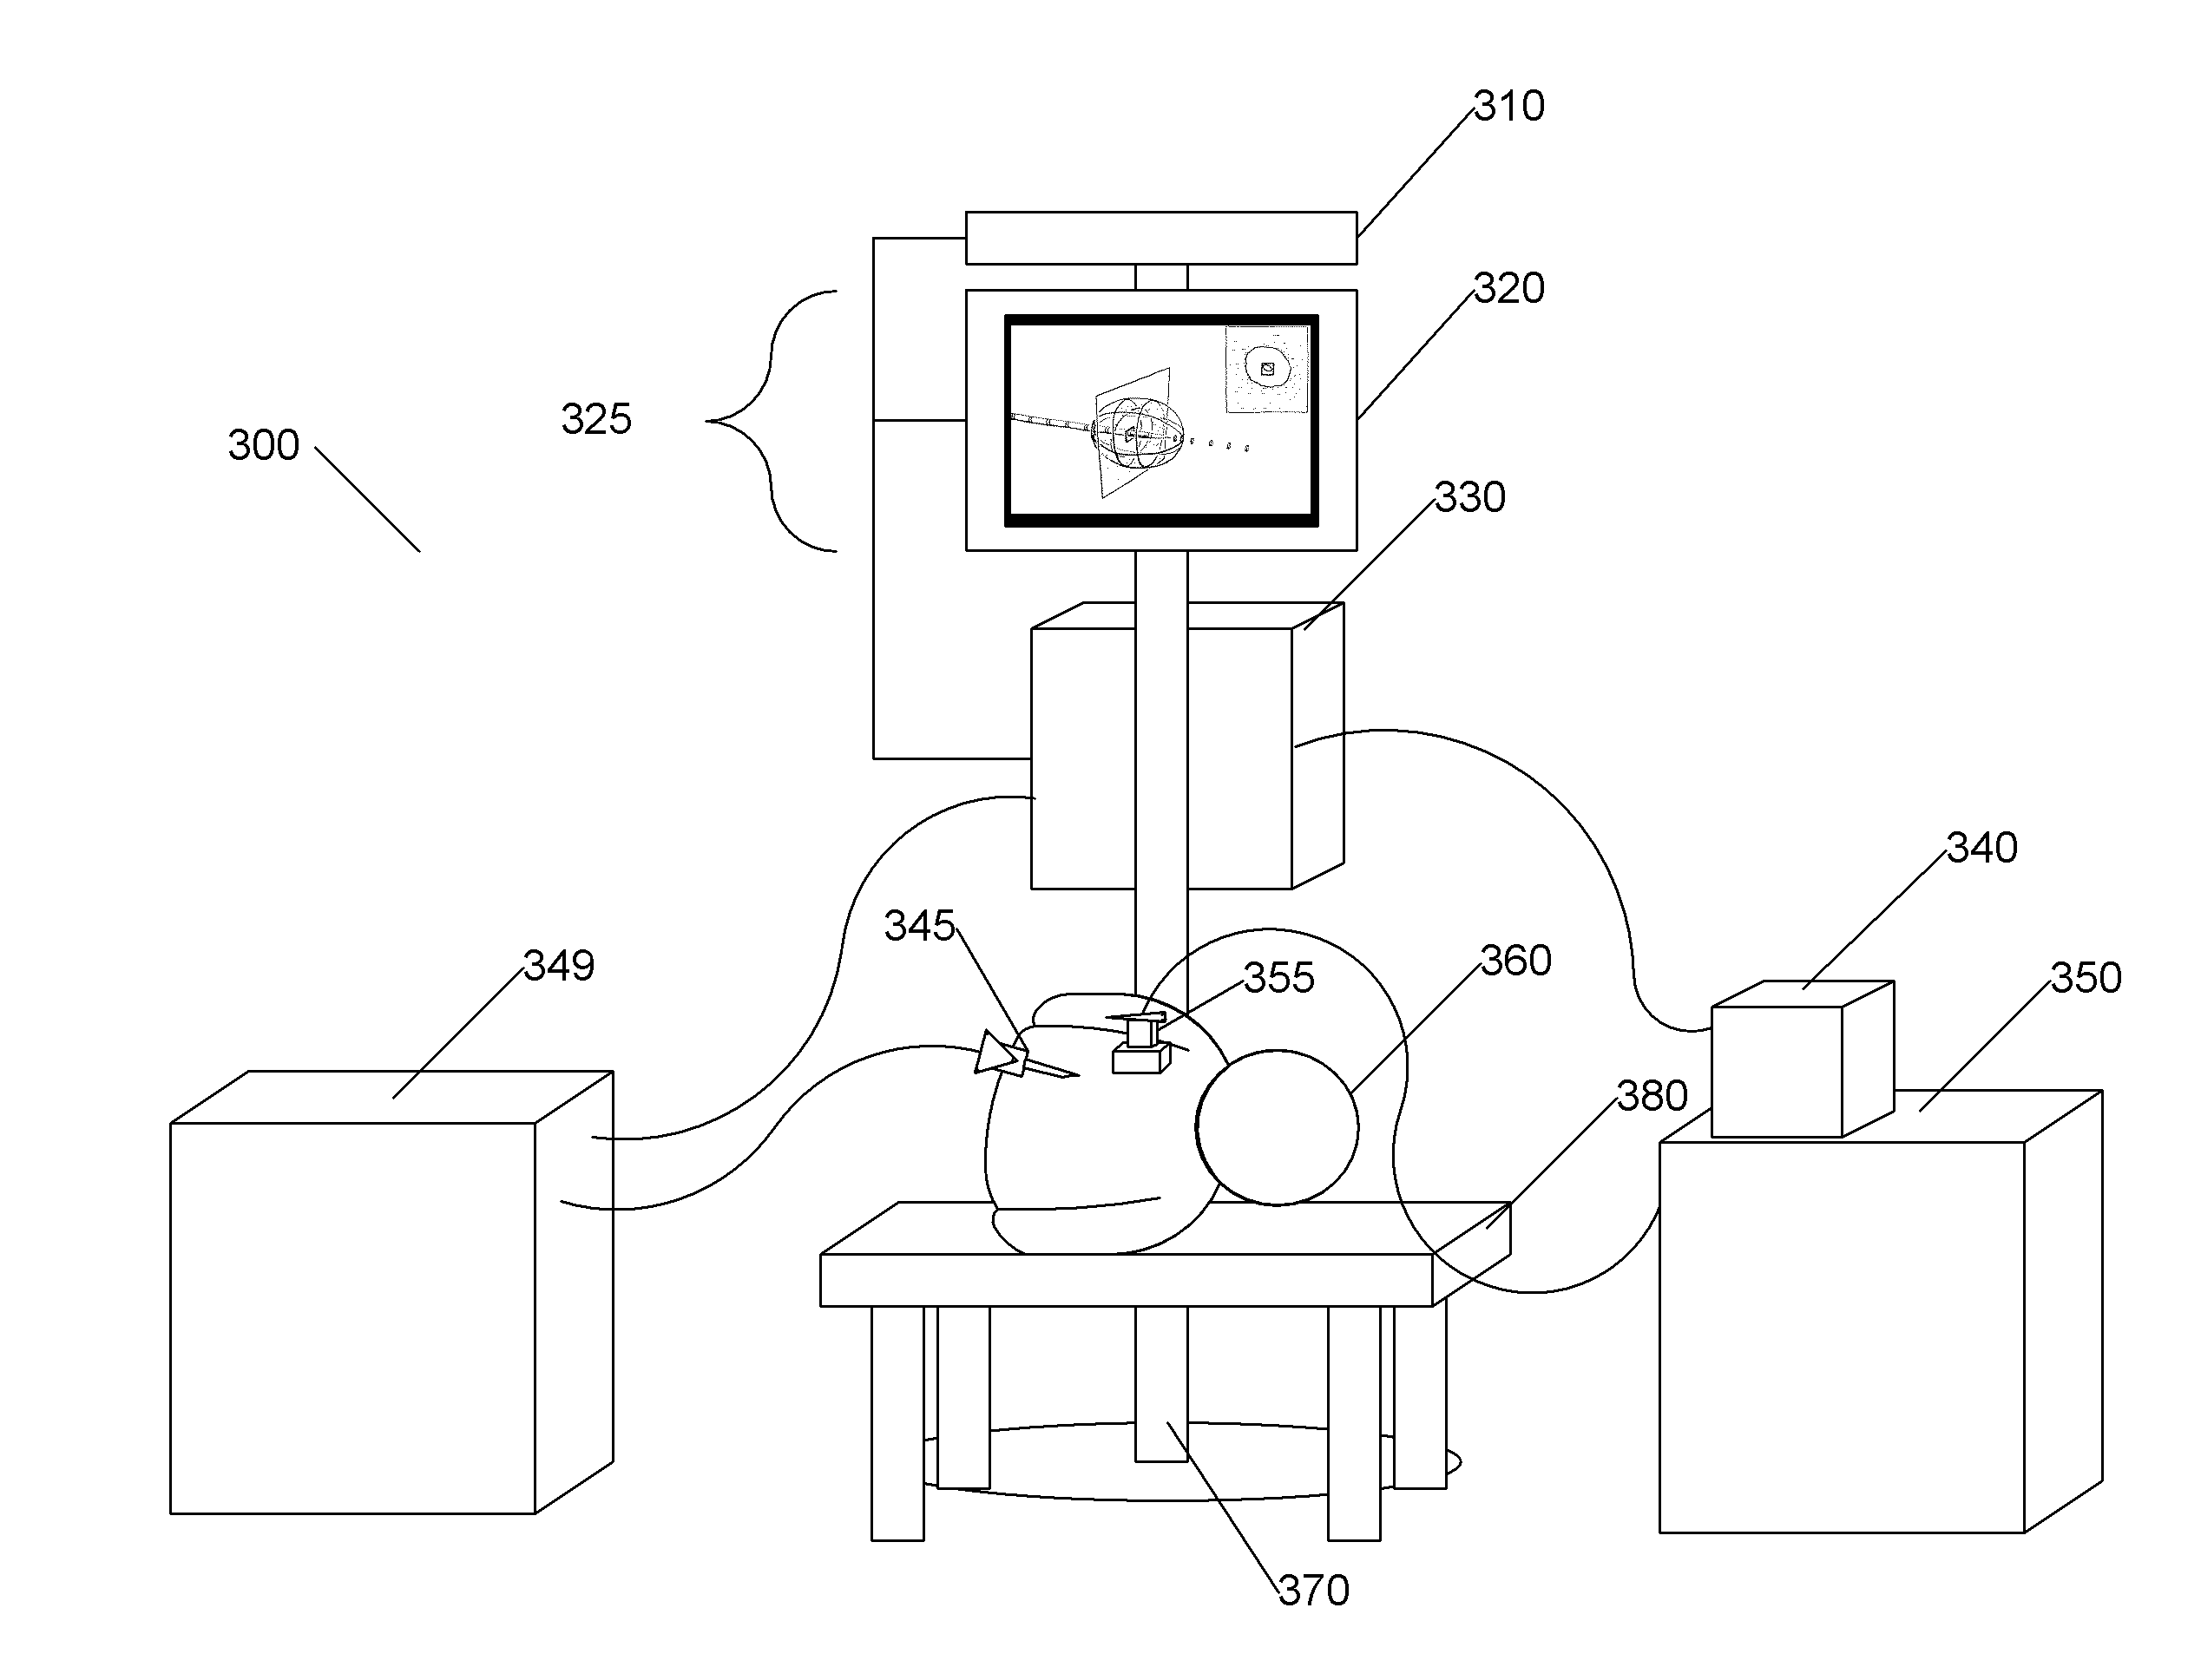 Systems, methods, apparatuses, and computer-readable media for image management in image-guided medical procedures